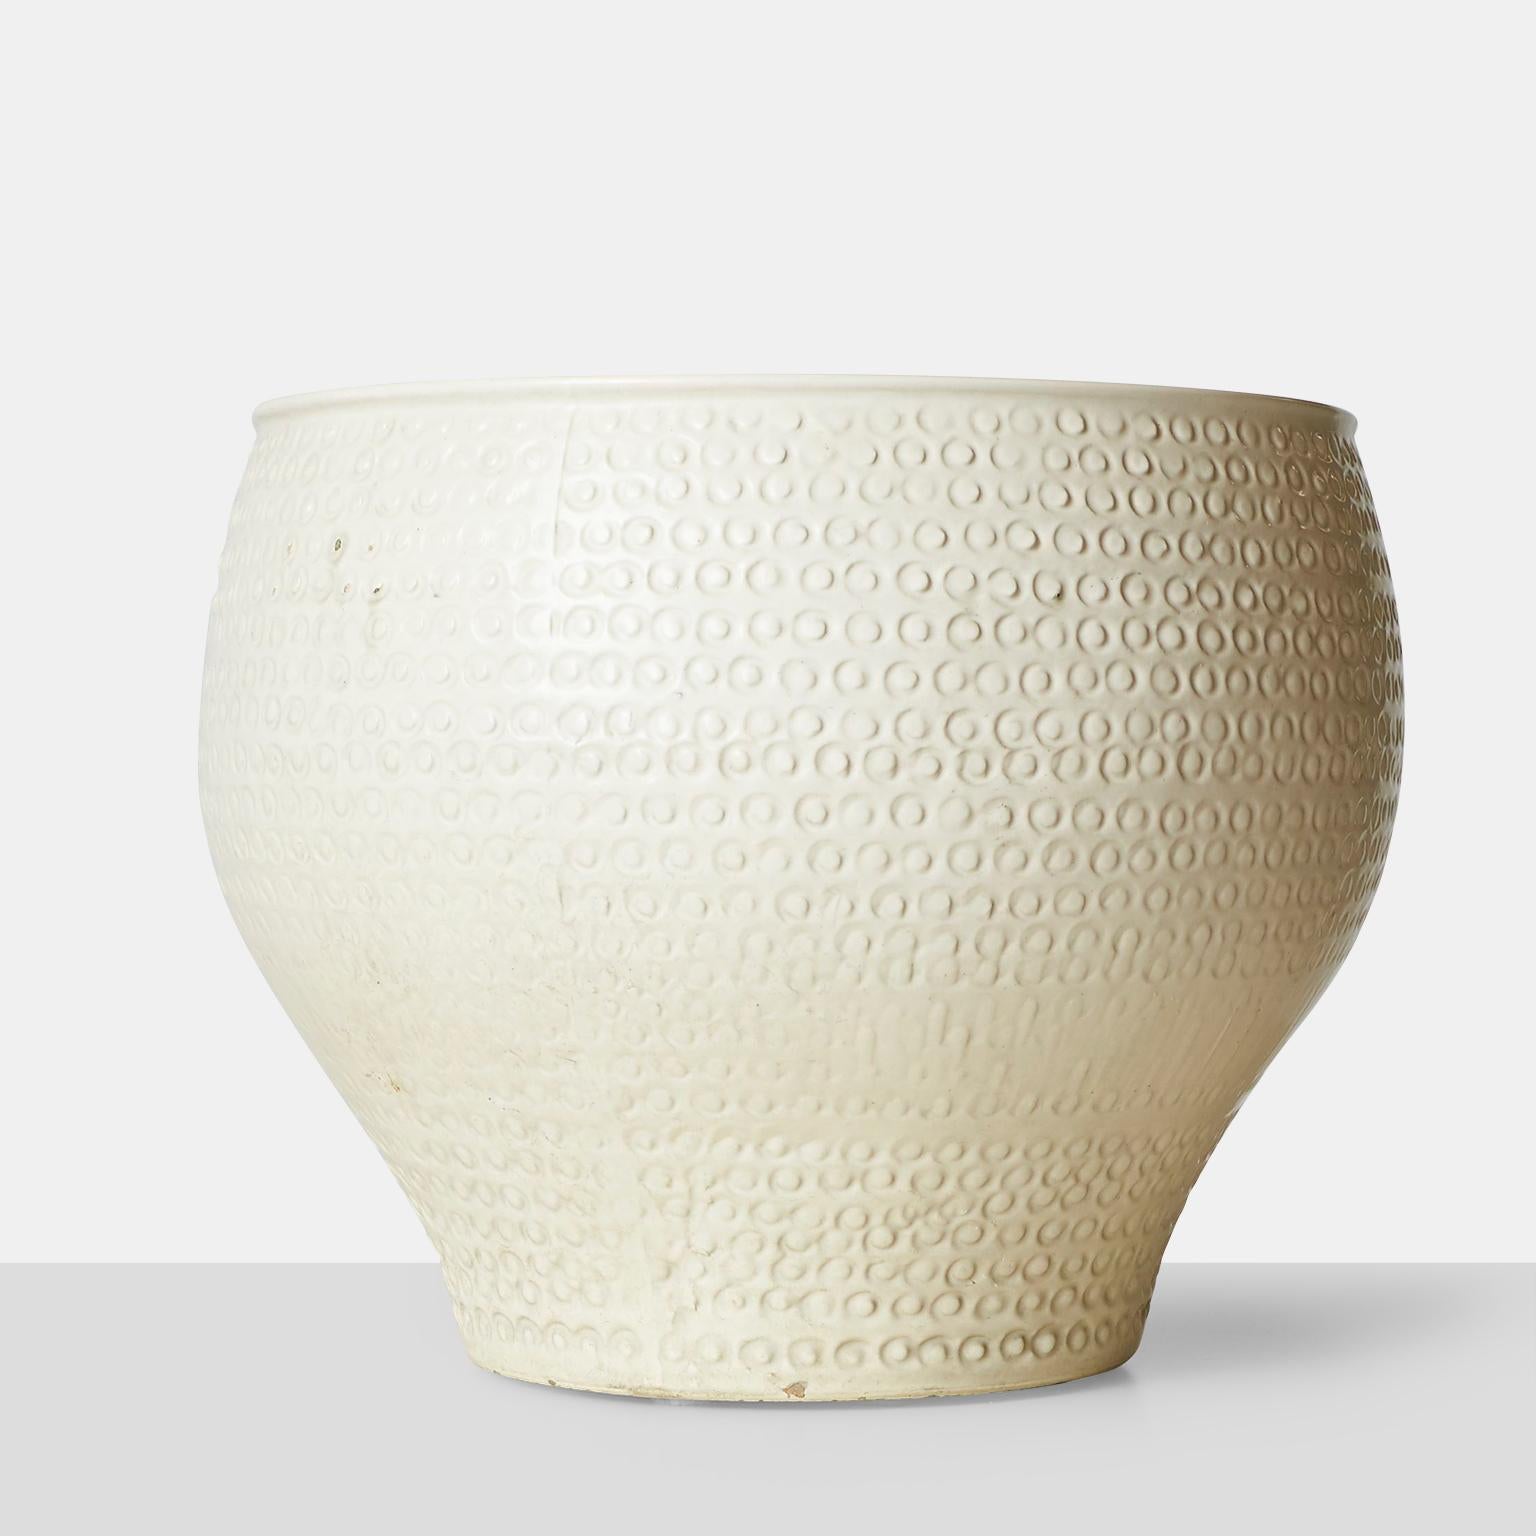 A beautifully made stoneware ivory glazed planter, by David Cressey, from the Pro/Artisan Collection for Architectural Pottery. 